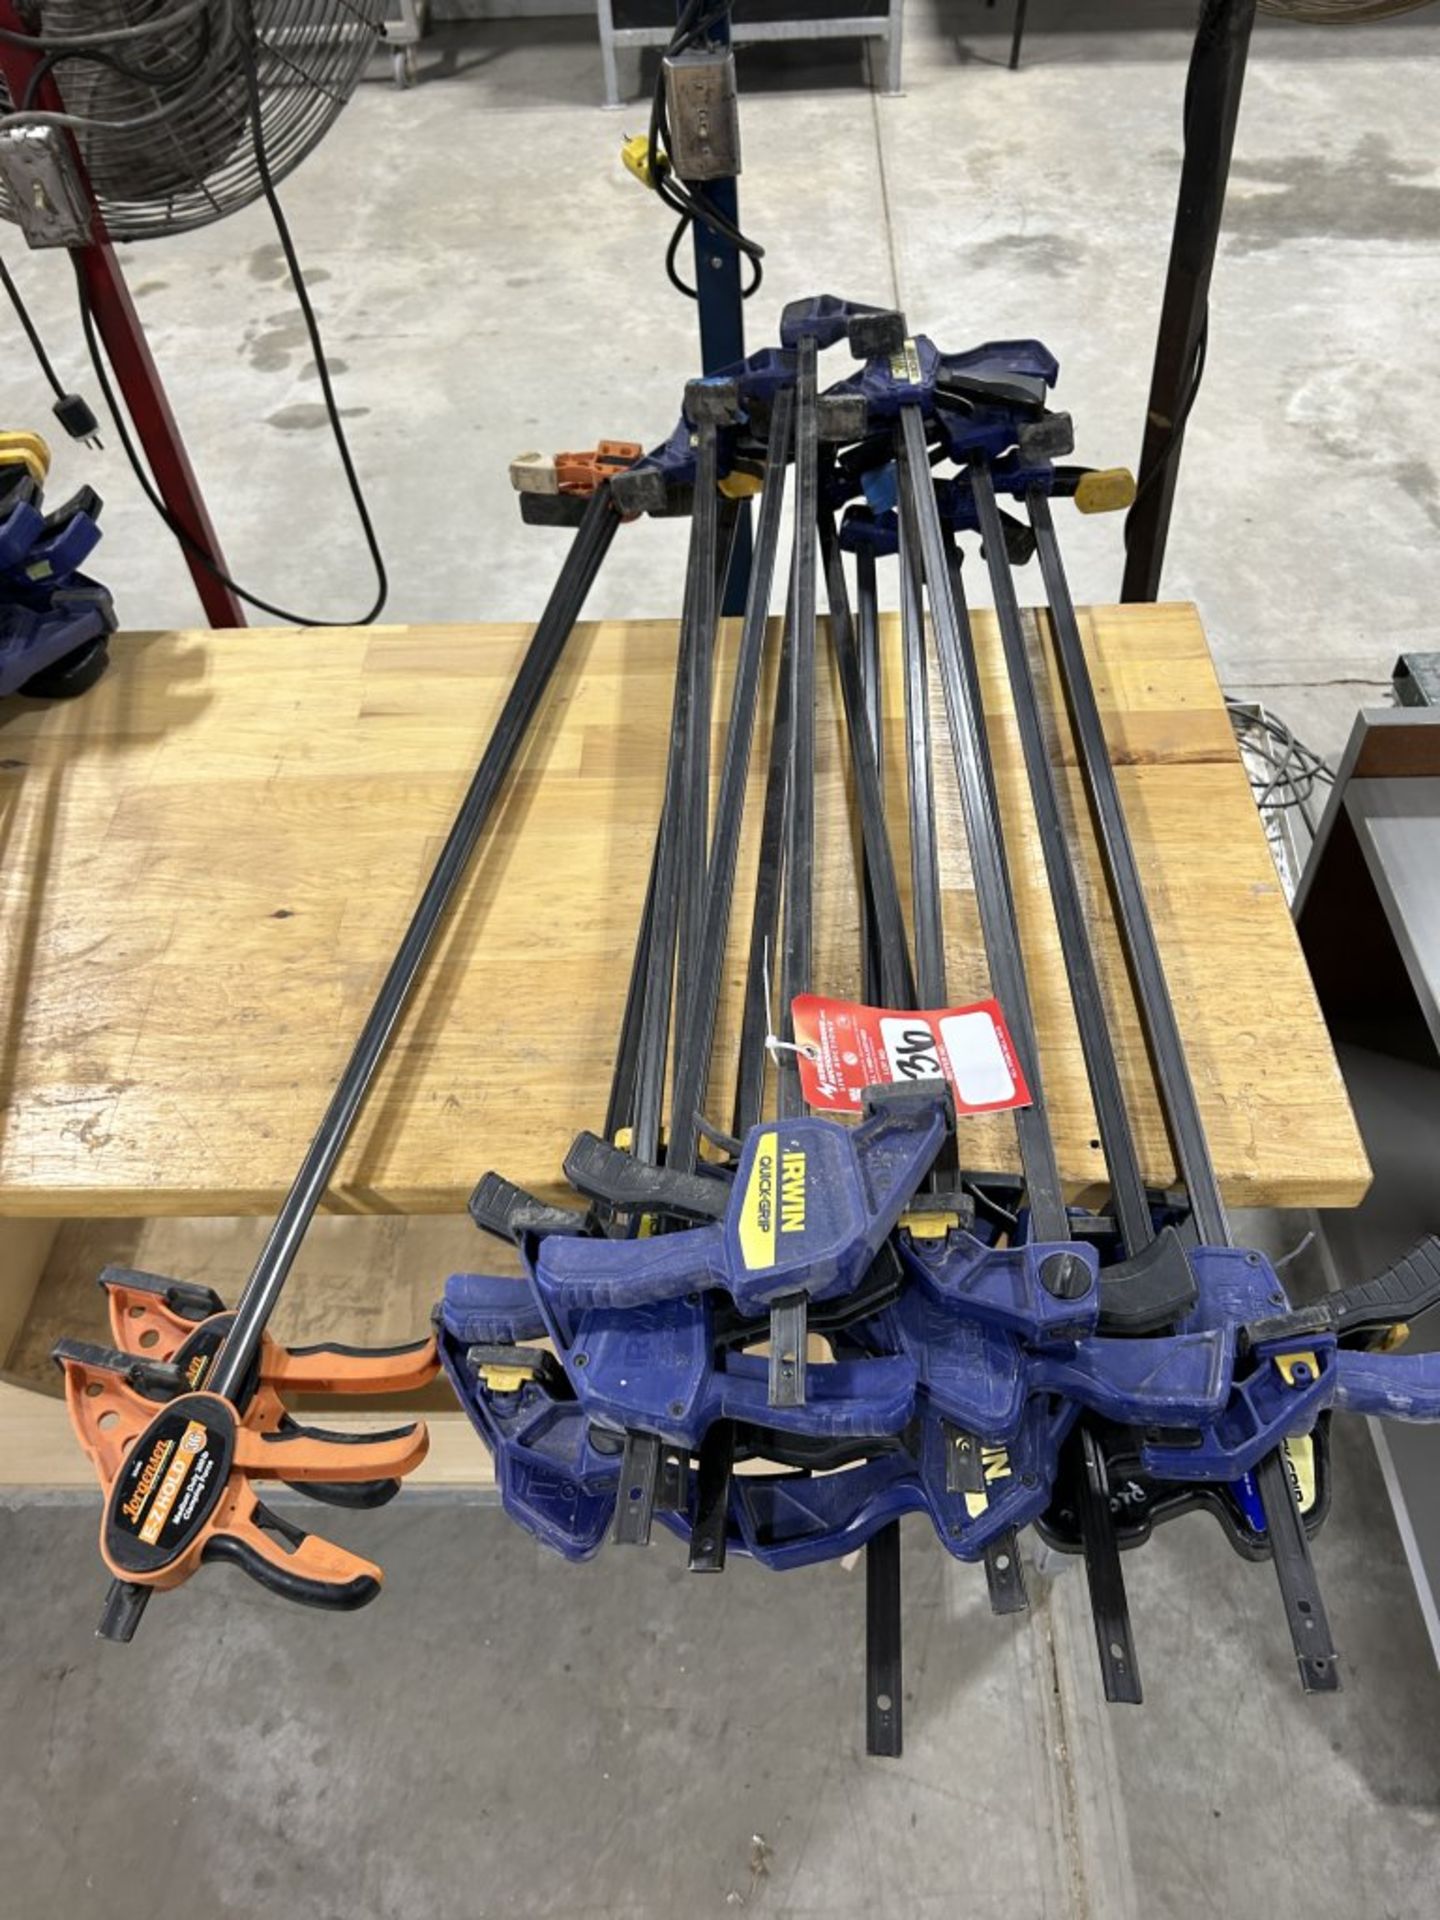 (15) LARGE 36'' QUICK GRIP CLAMPS, 13 ARE IRWIN BRAND, 2 ARE JORGENSEN BRAND